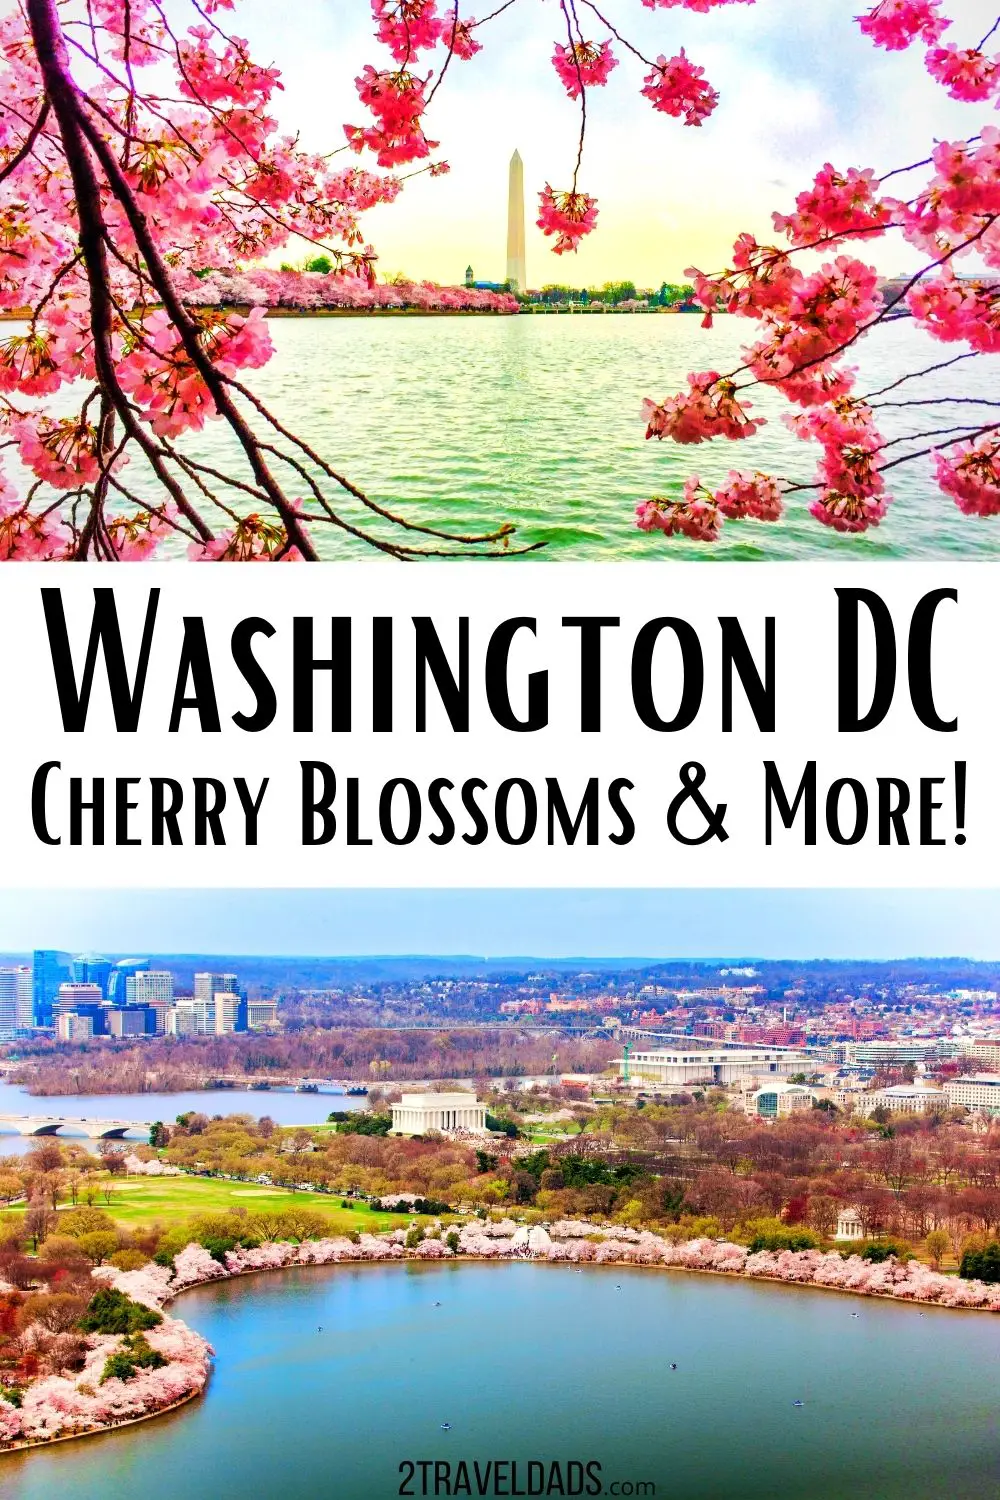 Everything you need to know to visit Washington DC for cherry blossoms. When to visit, where to go and everything else to do in the cultural center of DC.